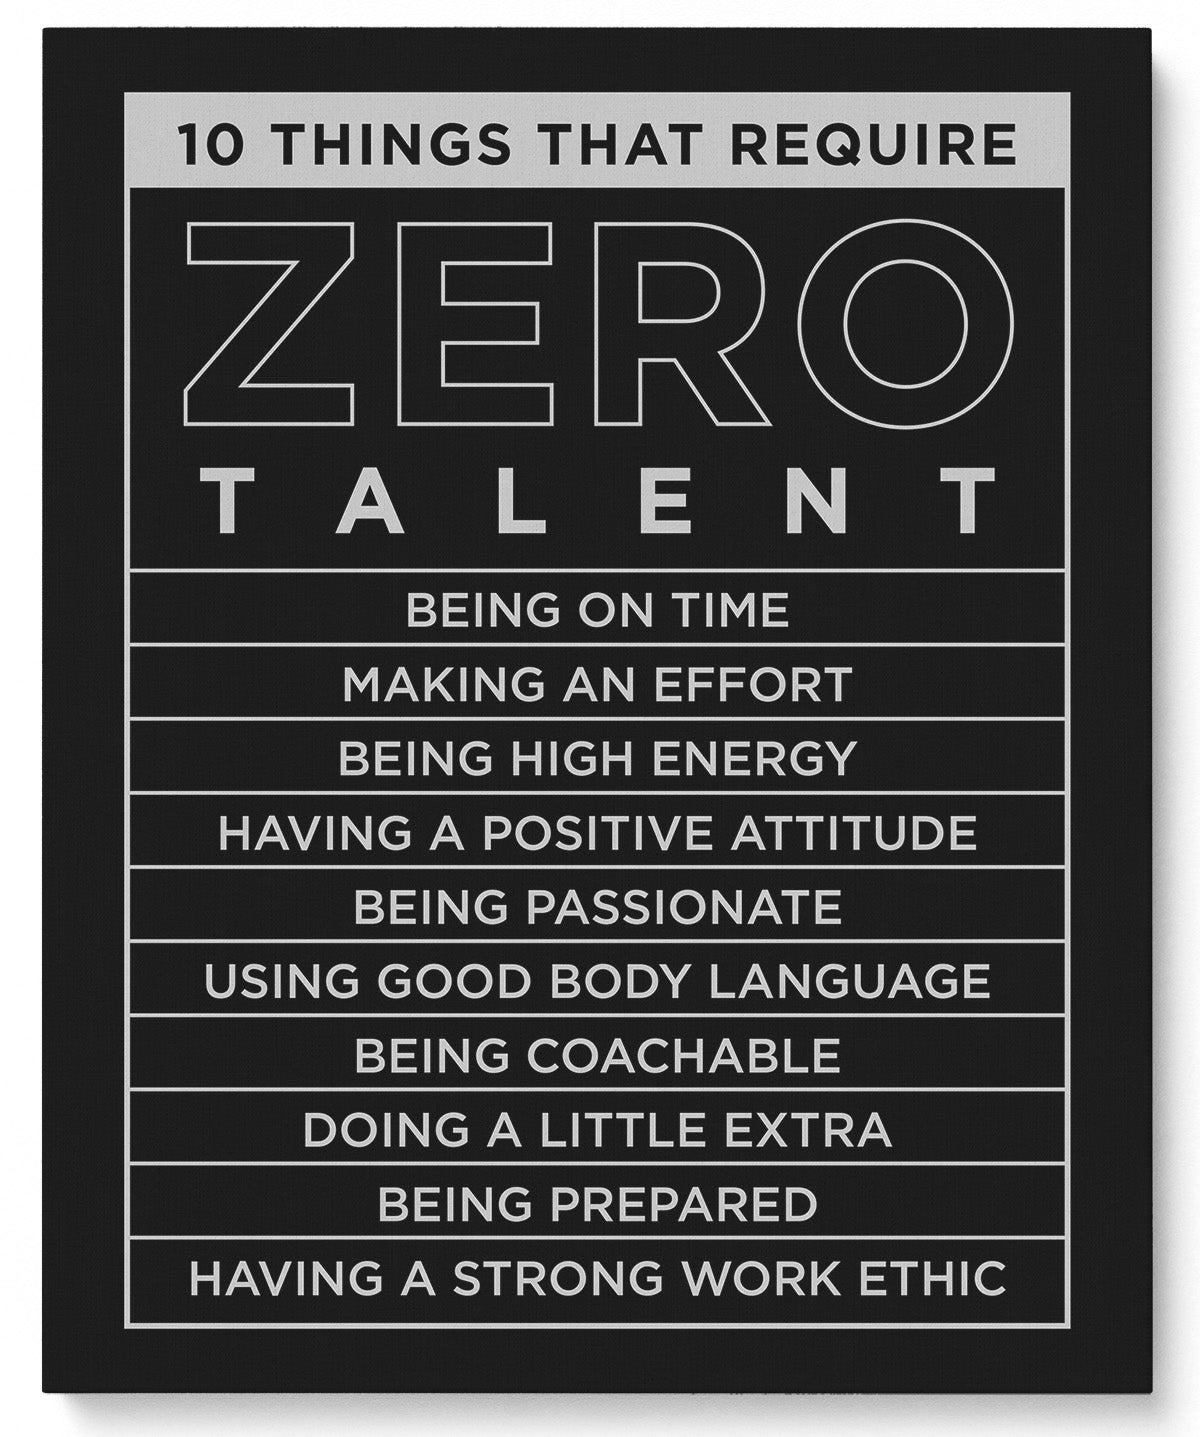 10 Things That Require Zero Talent Room Decor - Inspirational Wall Art - Motivational Wall Decor for Office Kitchen Bedroom Bathroom - Gift for Women Men Mentor Teens